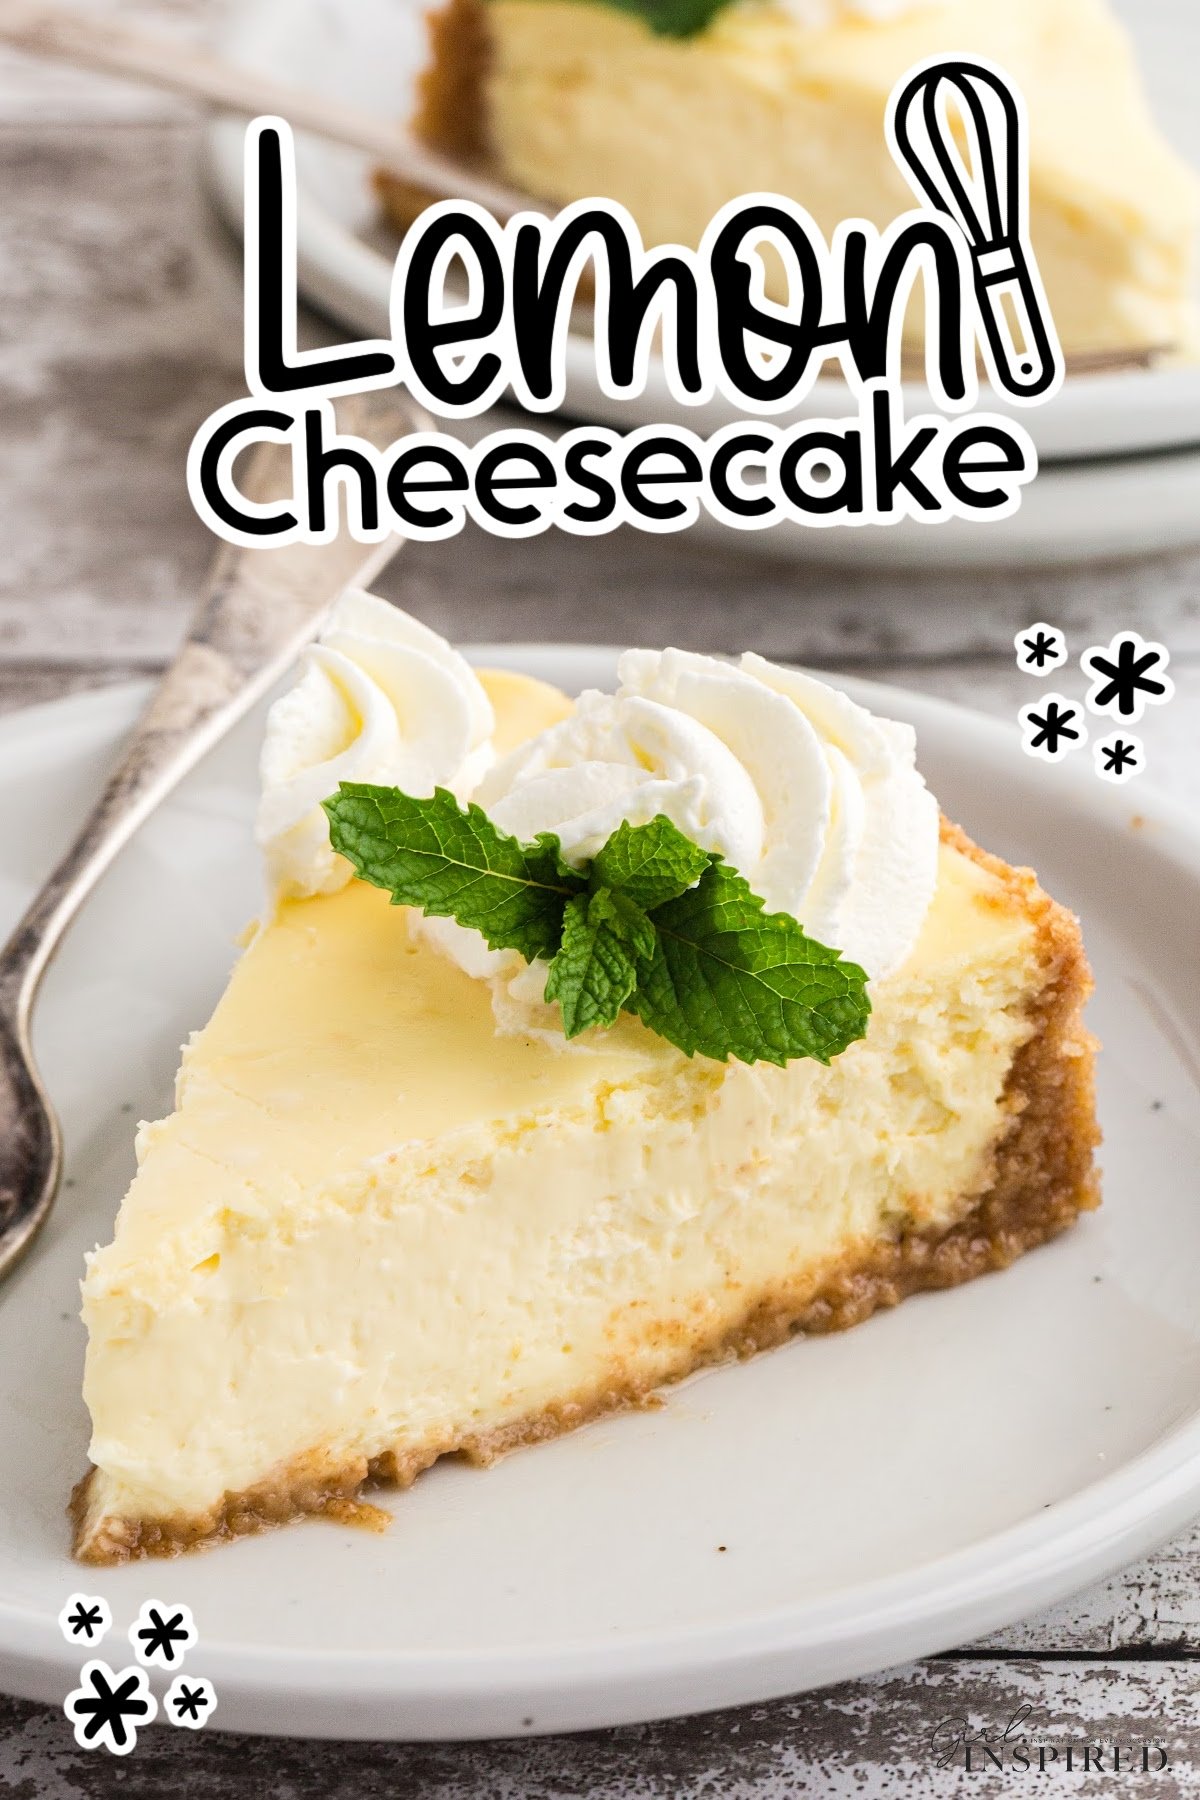 A slice of lemon cheesecake on a plate garnished with whipped cream and mint.